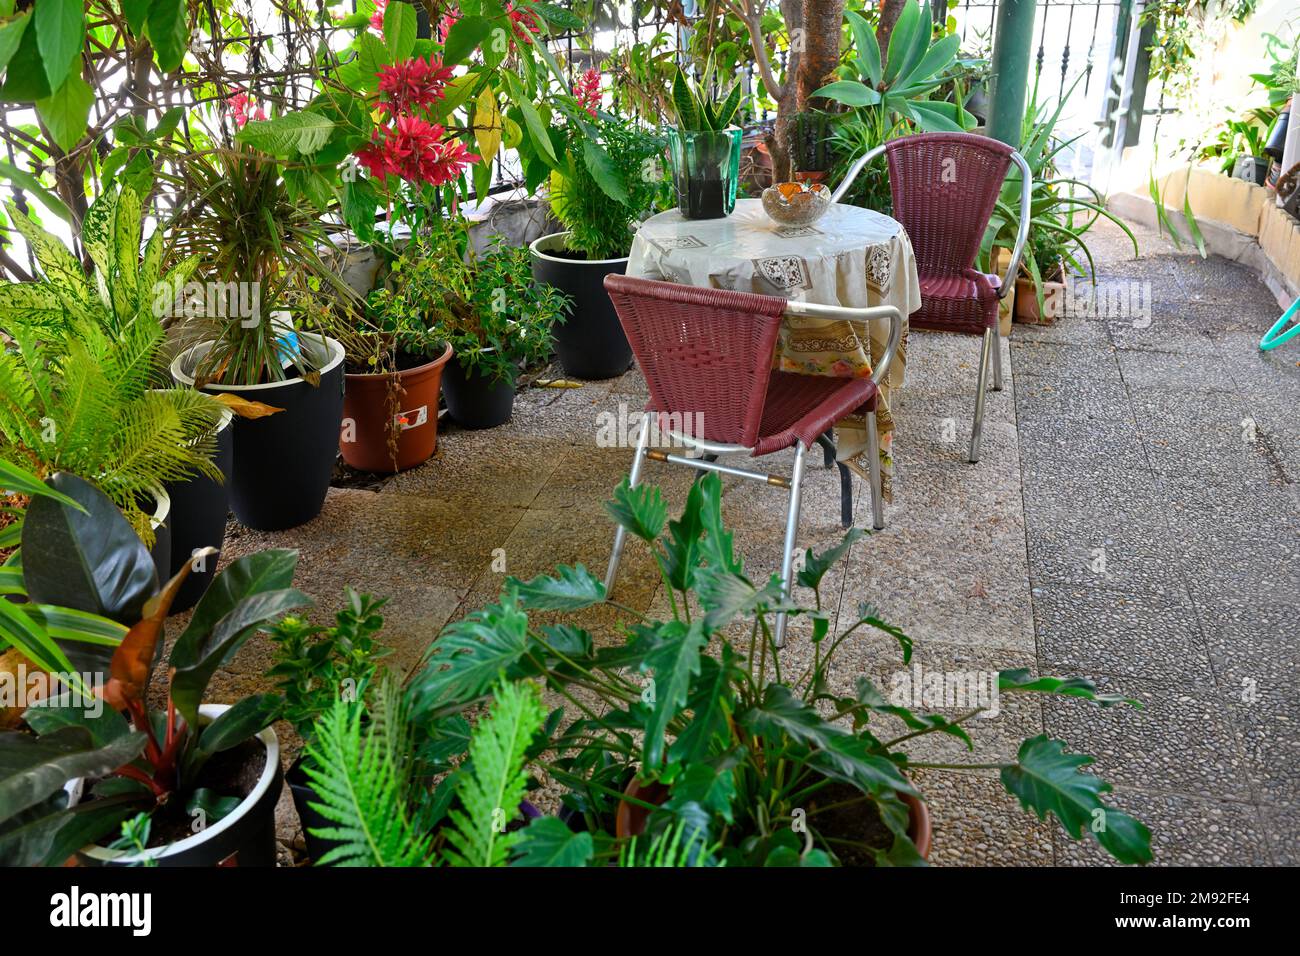 Enclosed outdoor patio with table and chairs all surrounded by green potted plants Stock Photo